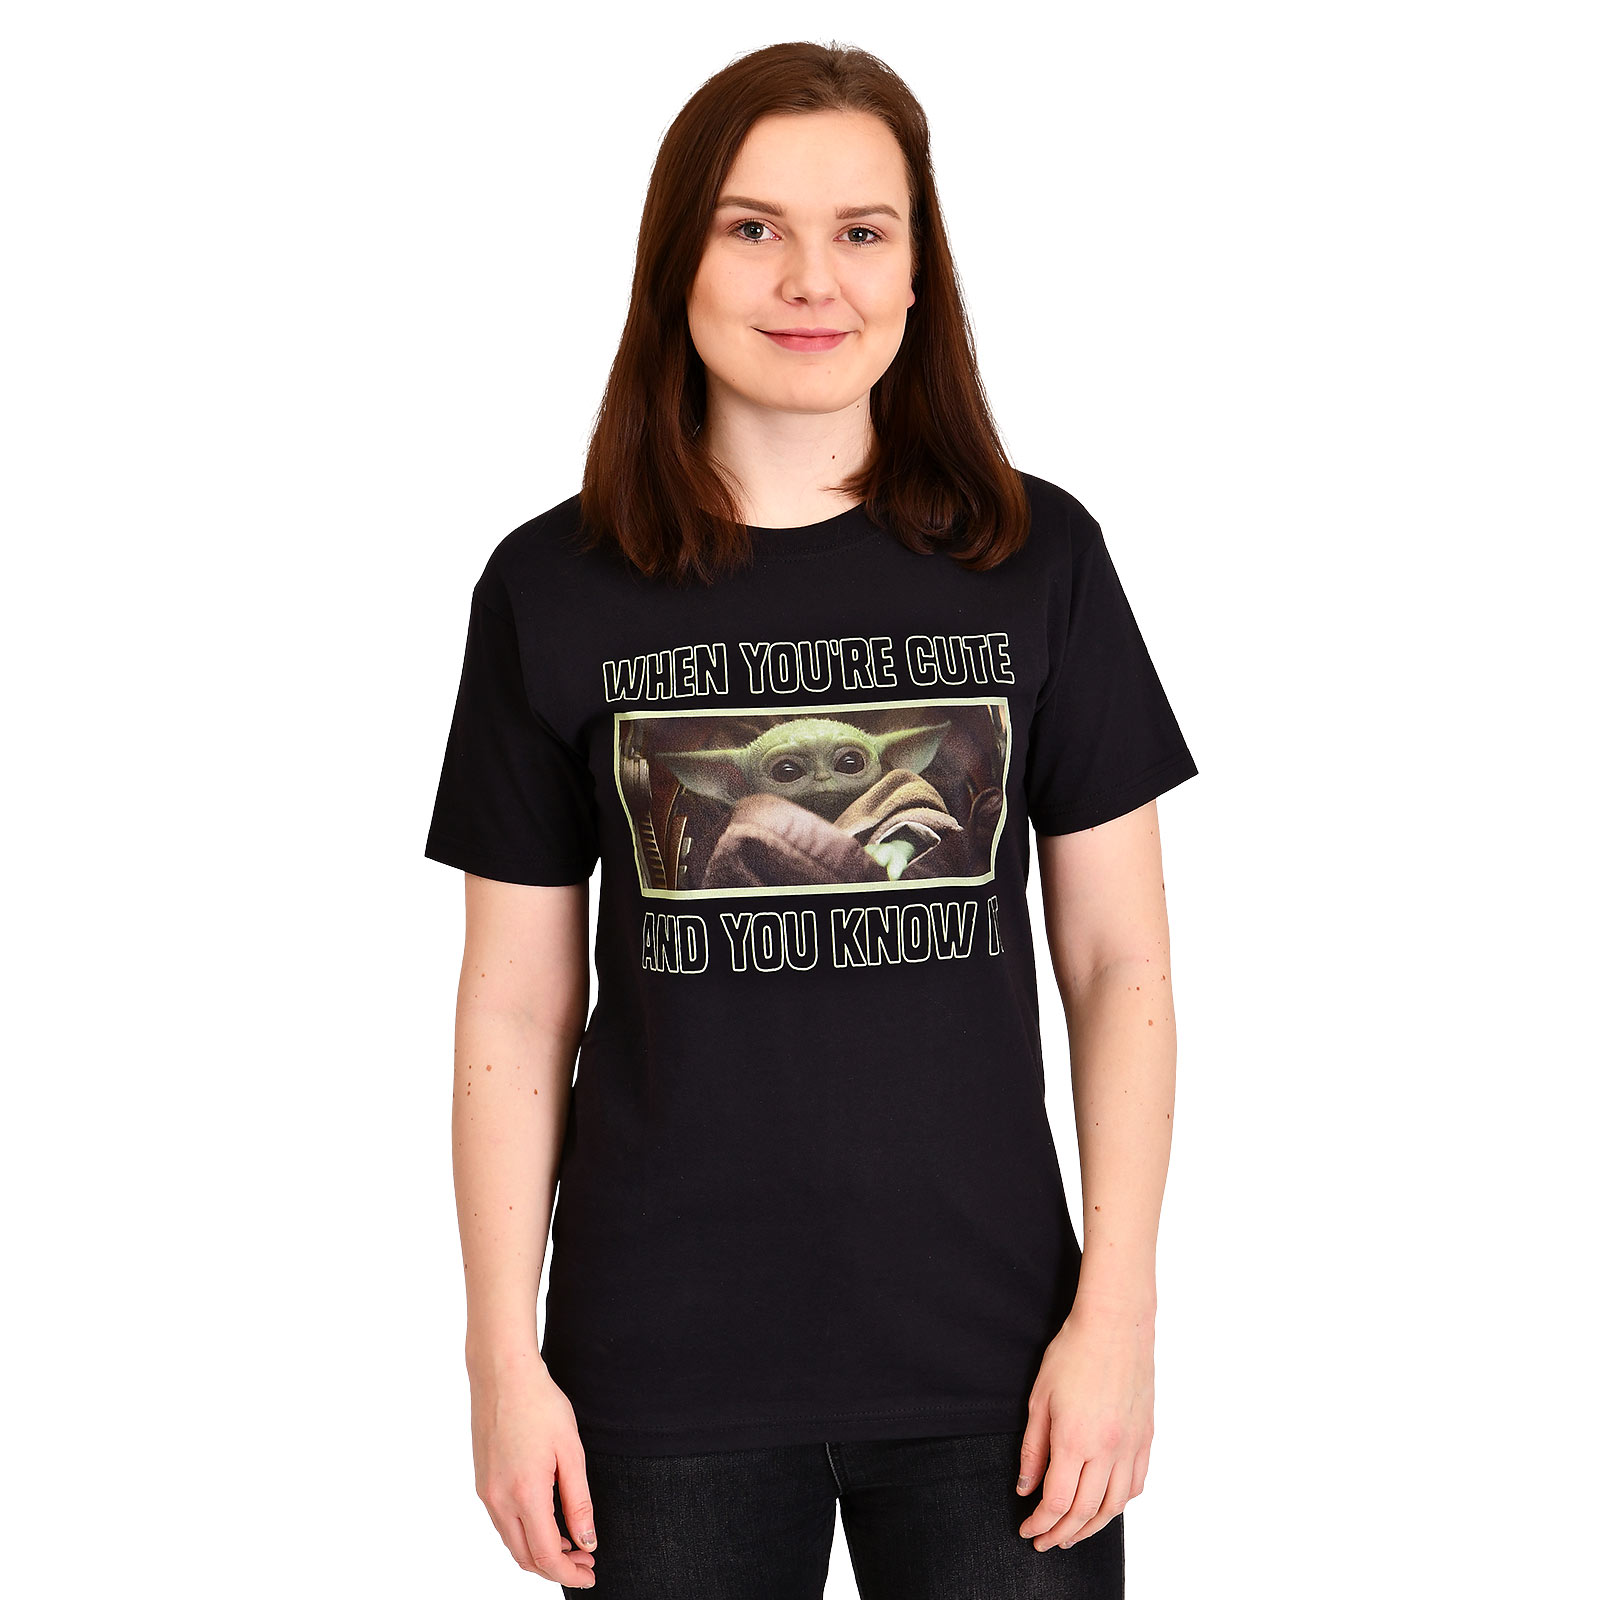 T-Shirt The Child Cute and You Know It - Star Wars The Mandalorian